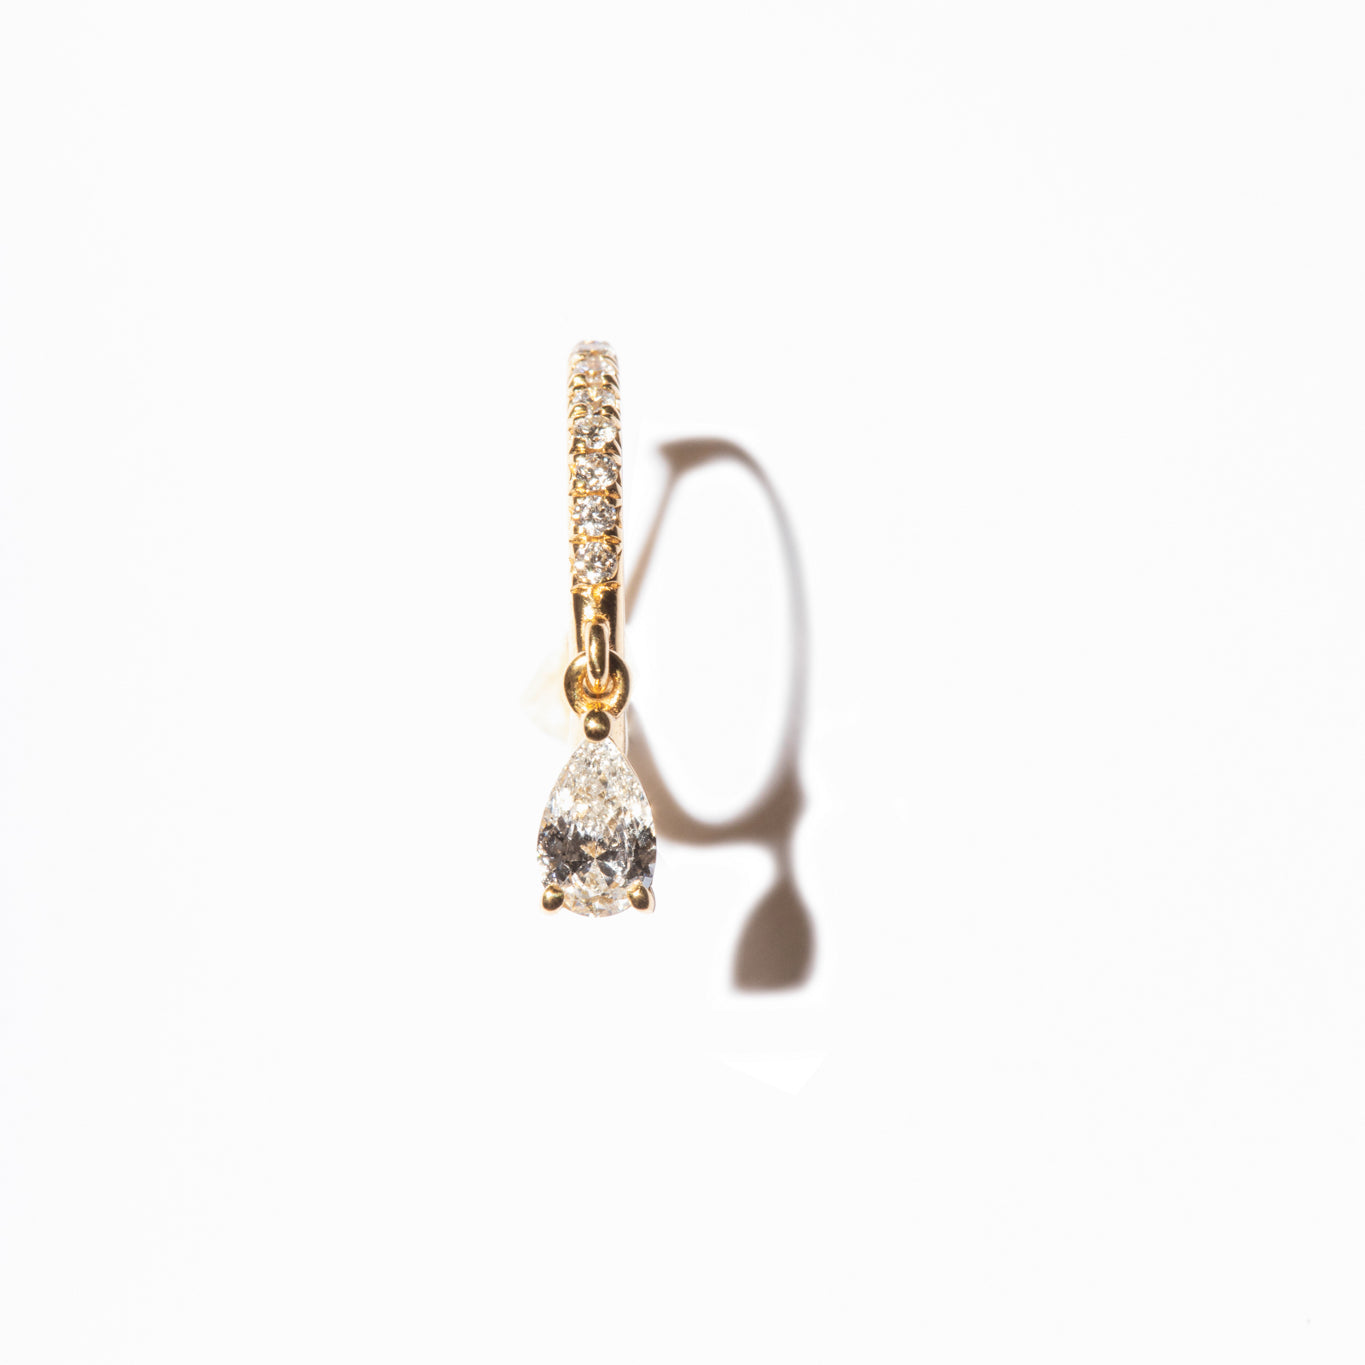 Elegant and timeless diamond earrings with pavé setting and pear-cut diamond, crafted from sustainable lab-grown diamonds and recycled gold. 